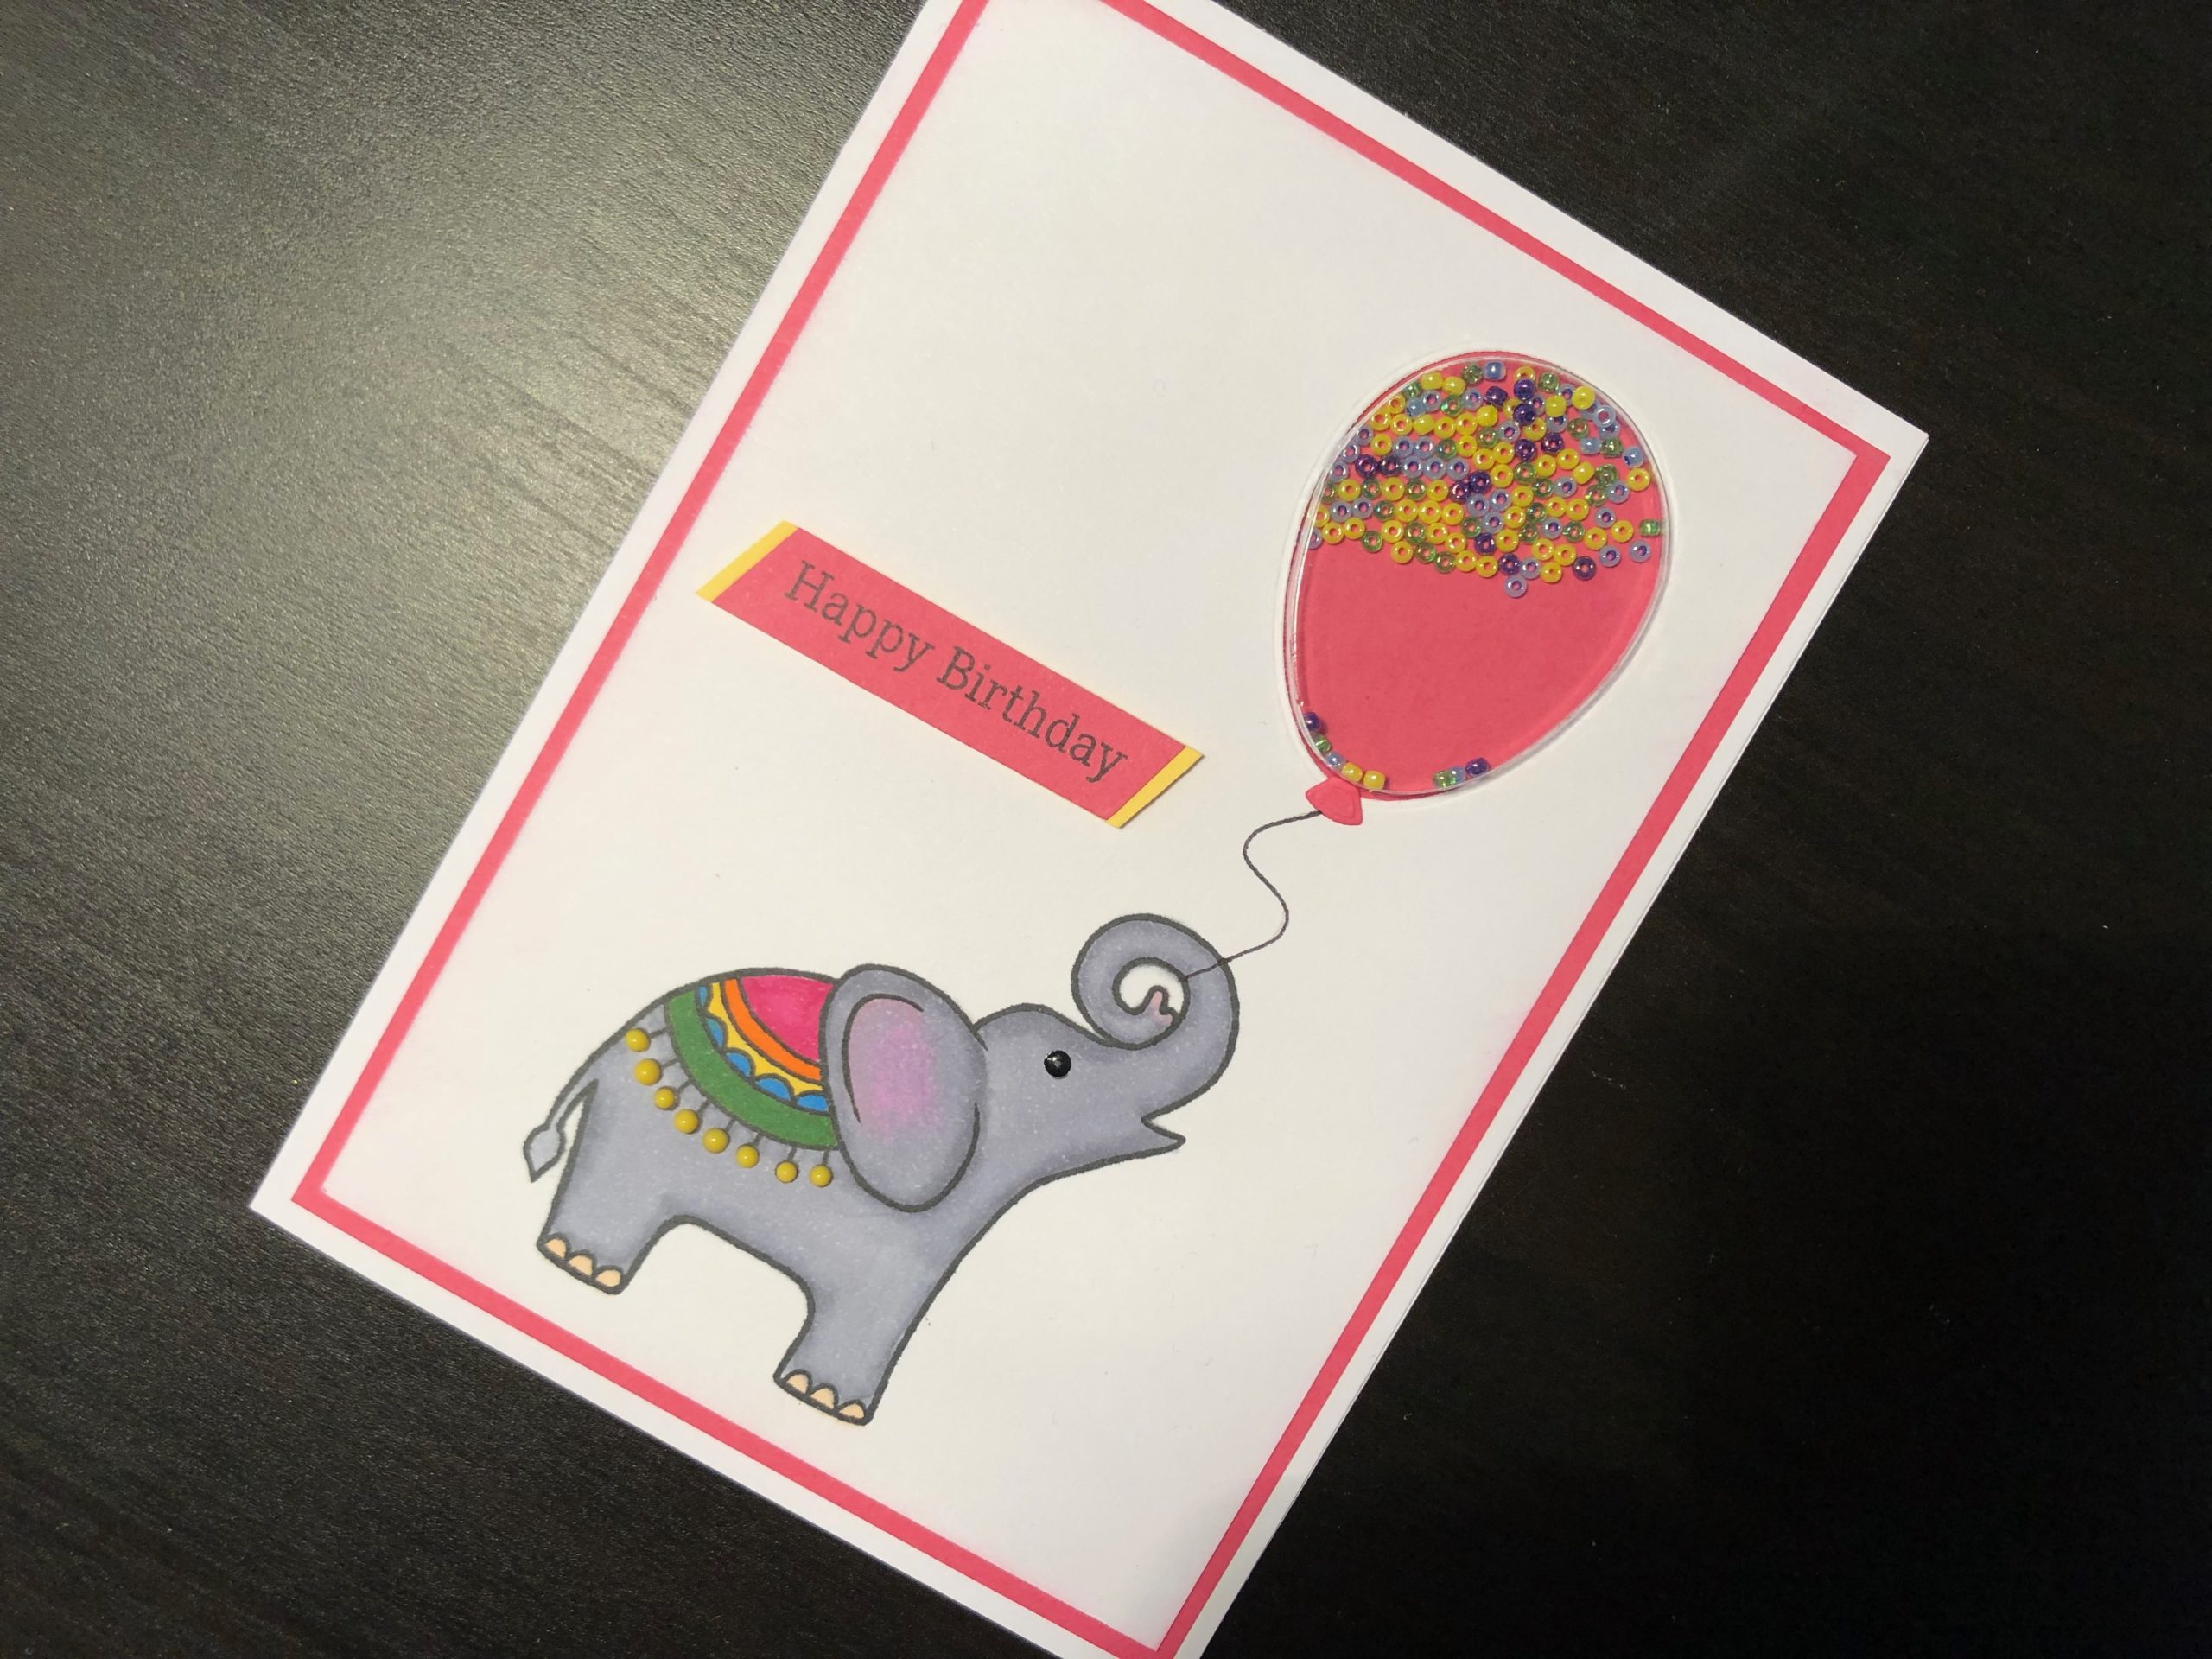 Hand made birthday card with balloon shaker and baby elephant